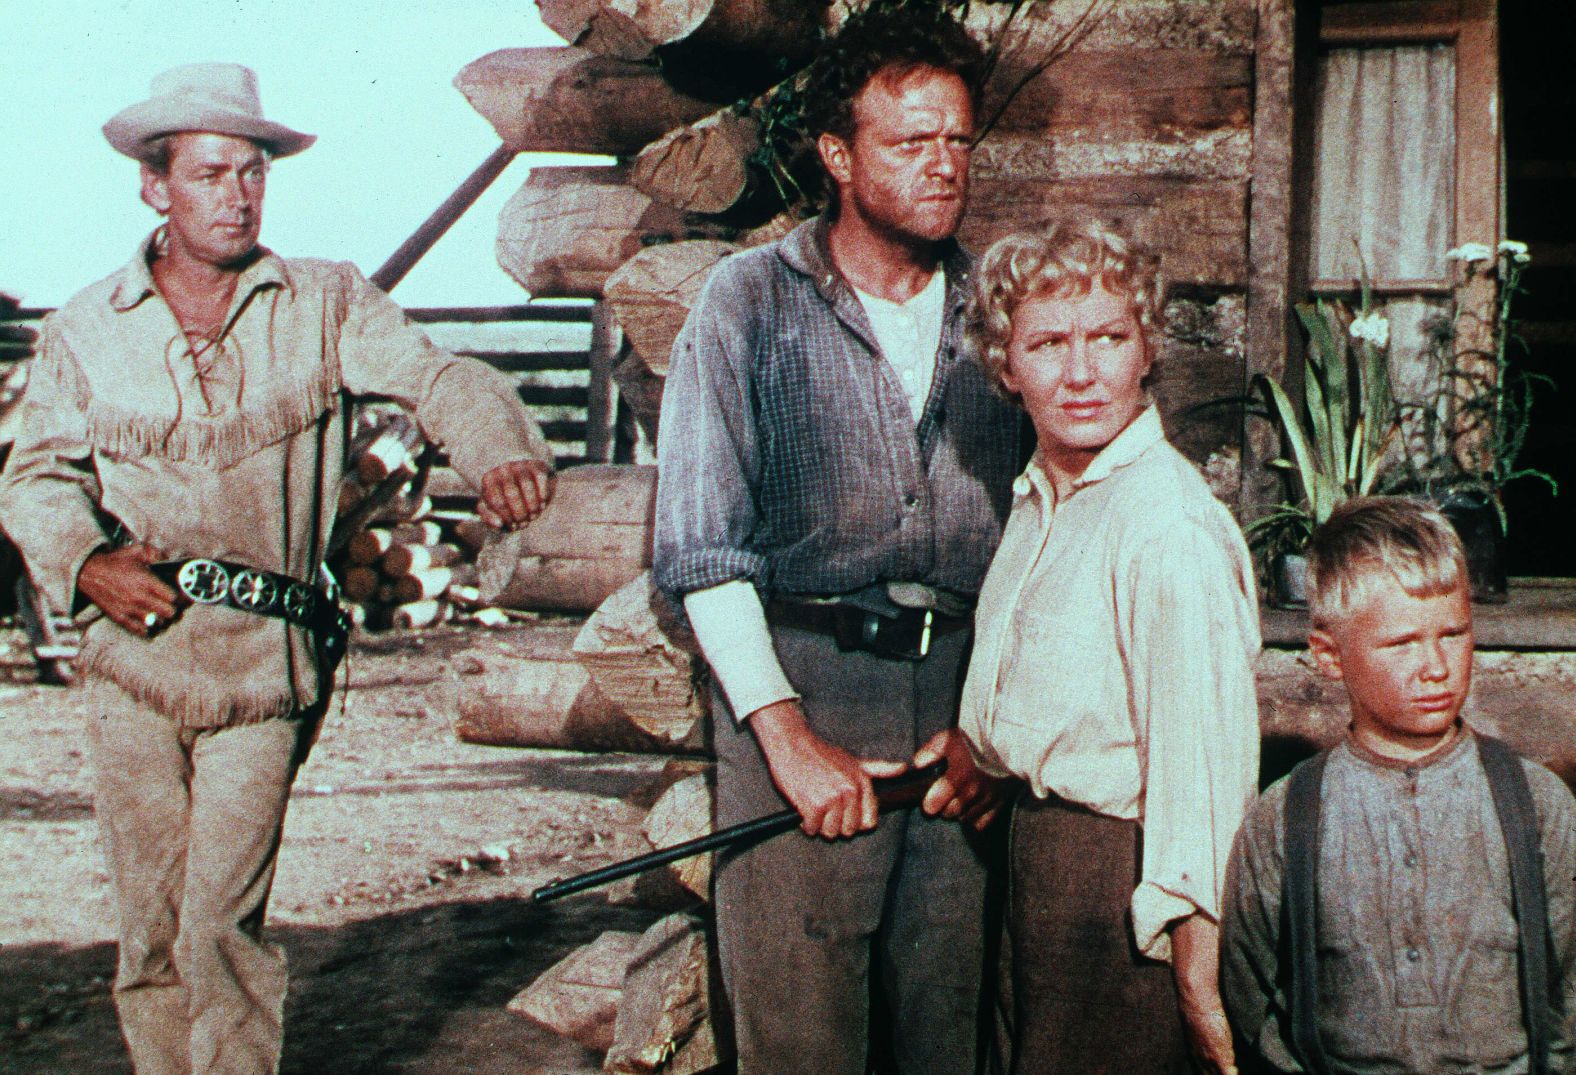 <strong>"Shane"</strong>: A gunfighter tries to find some peace as a farmhand on a ranch, but violence always haunts him in this classic Western. <strong>(Hulu)</strong>